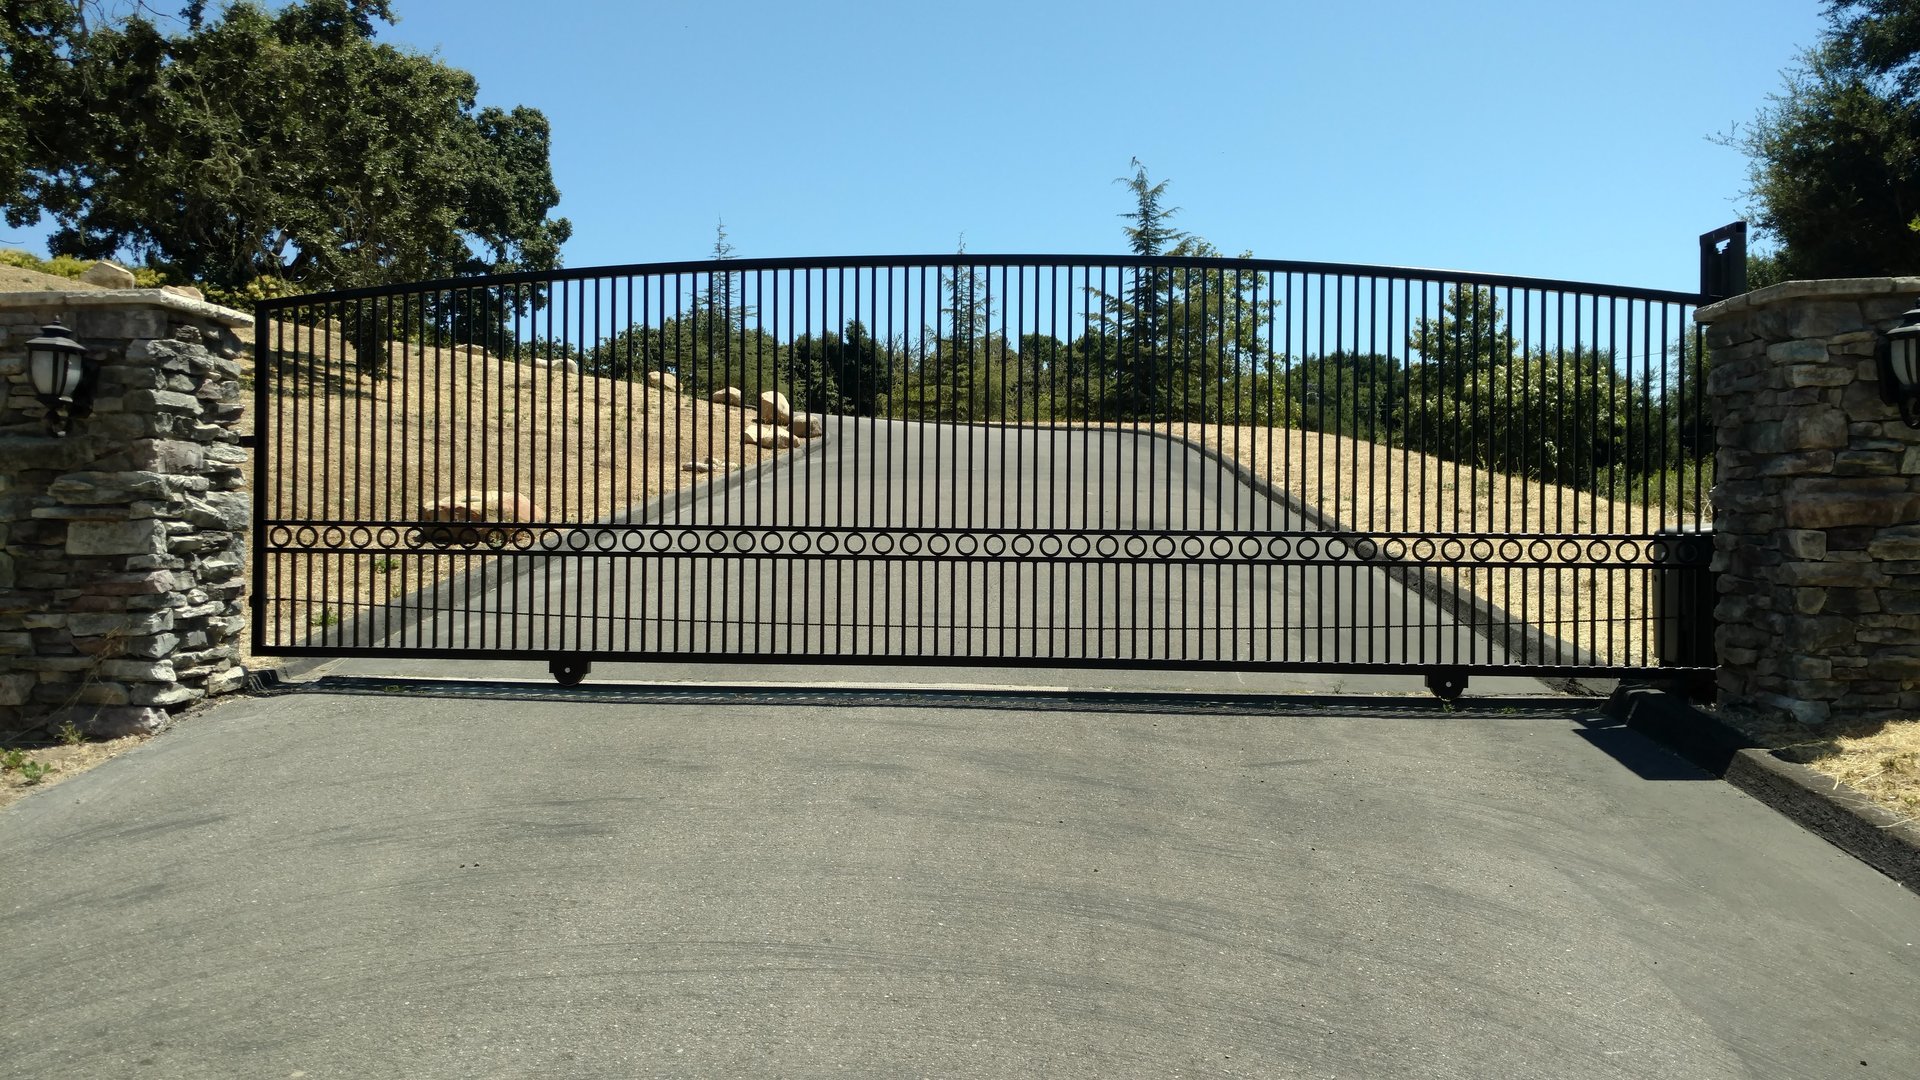 ML Entry Gates your first choice - Call Morty 805.295.9128